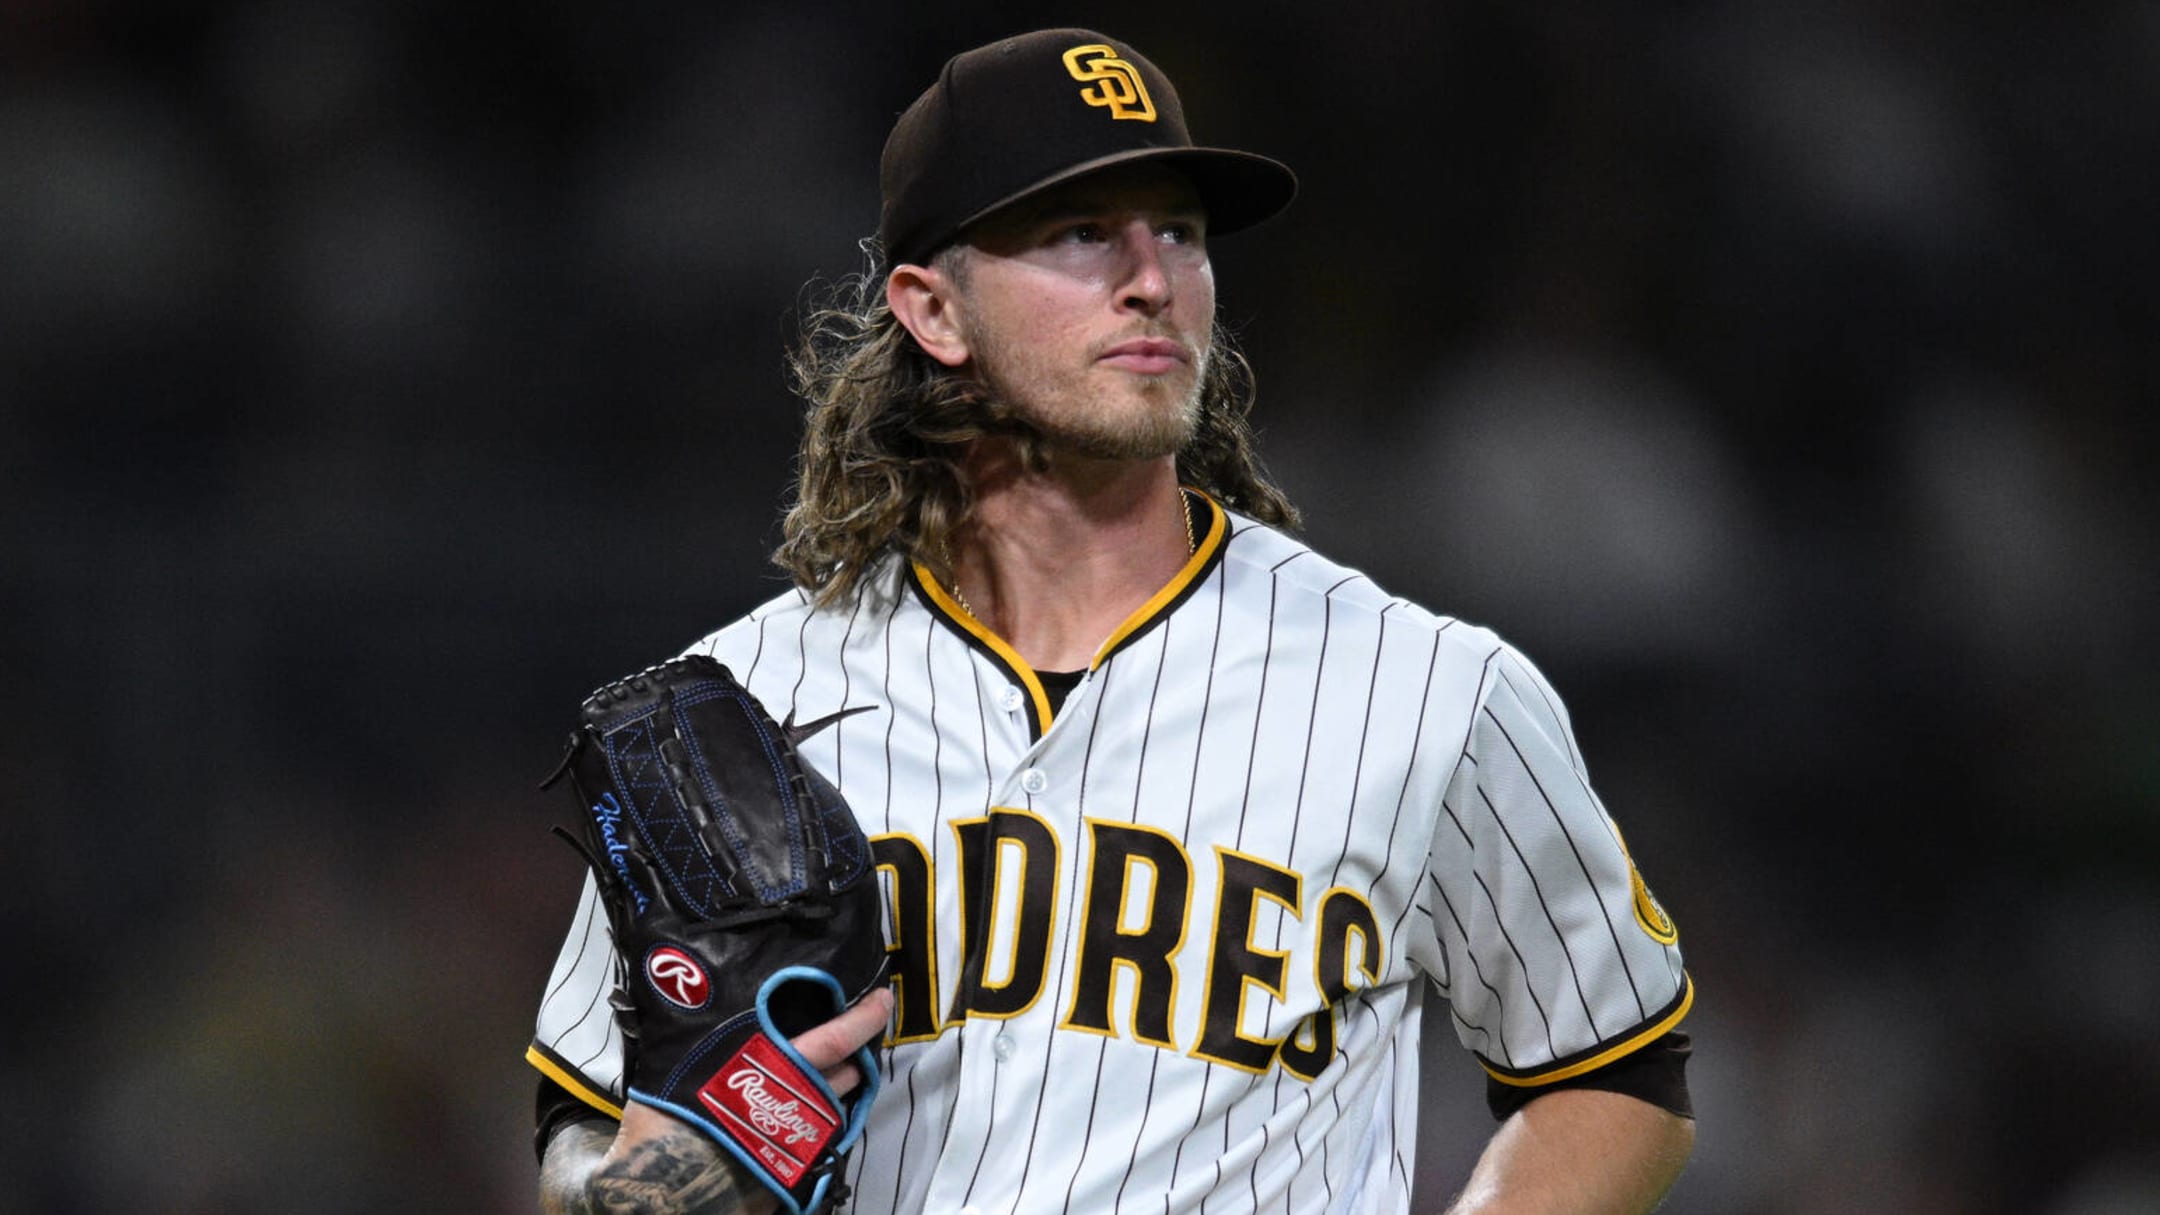 Padres to give closer Josh Hader 'a little break' amid struggles